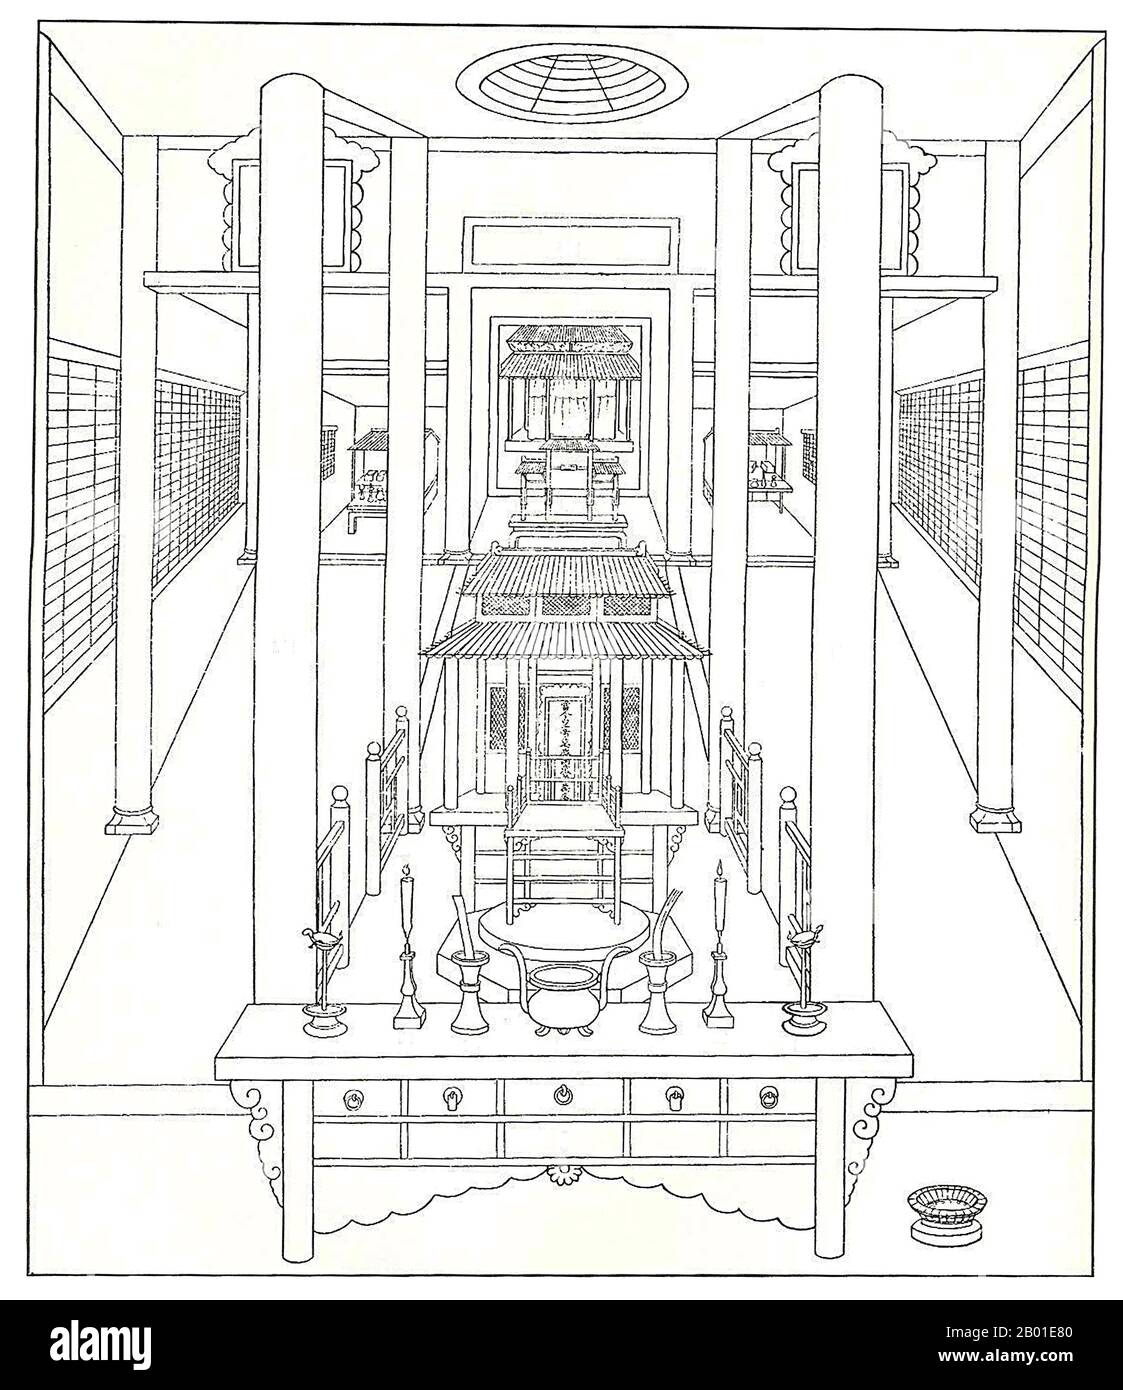 China: The interior of the Kaifeng synagogue based on a drawing by the Jesuit Père Jean Domange (1666-1735), 1722.  The Kaifeng Jews are members of a small Jewish community that has existed in Kaifeng, in the Henan province of China, for hundreds of years.  Jews in modern China have traditionally called themselves Youtai (from Judah) in Mandarin Chinese which is also the predominant contemporary Chinese language term for Jews in general. However, the community was known by their Han Chinese neighbors as adherents of Tiaojinjiao, meaning, loosely, the religion which removes the sinew. Stock Photo